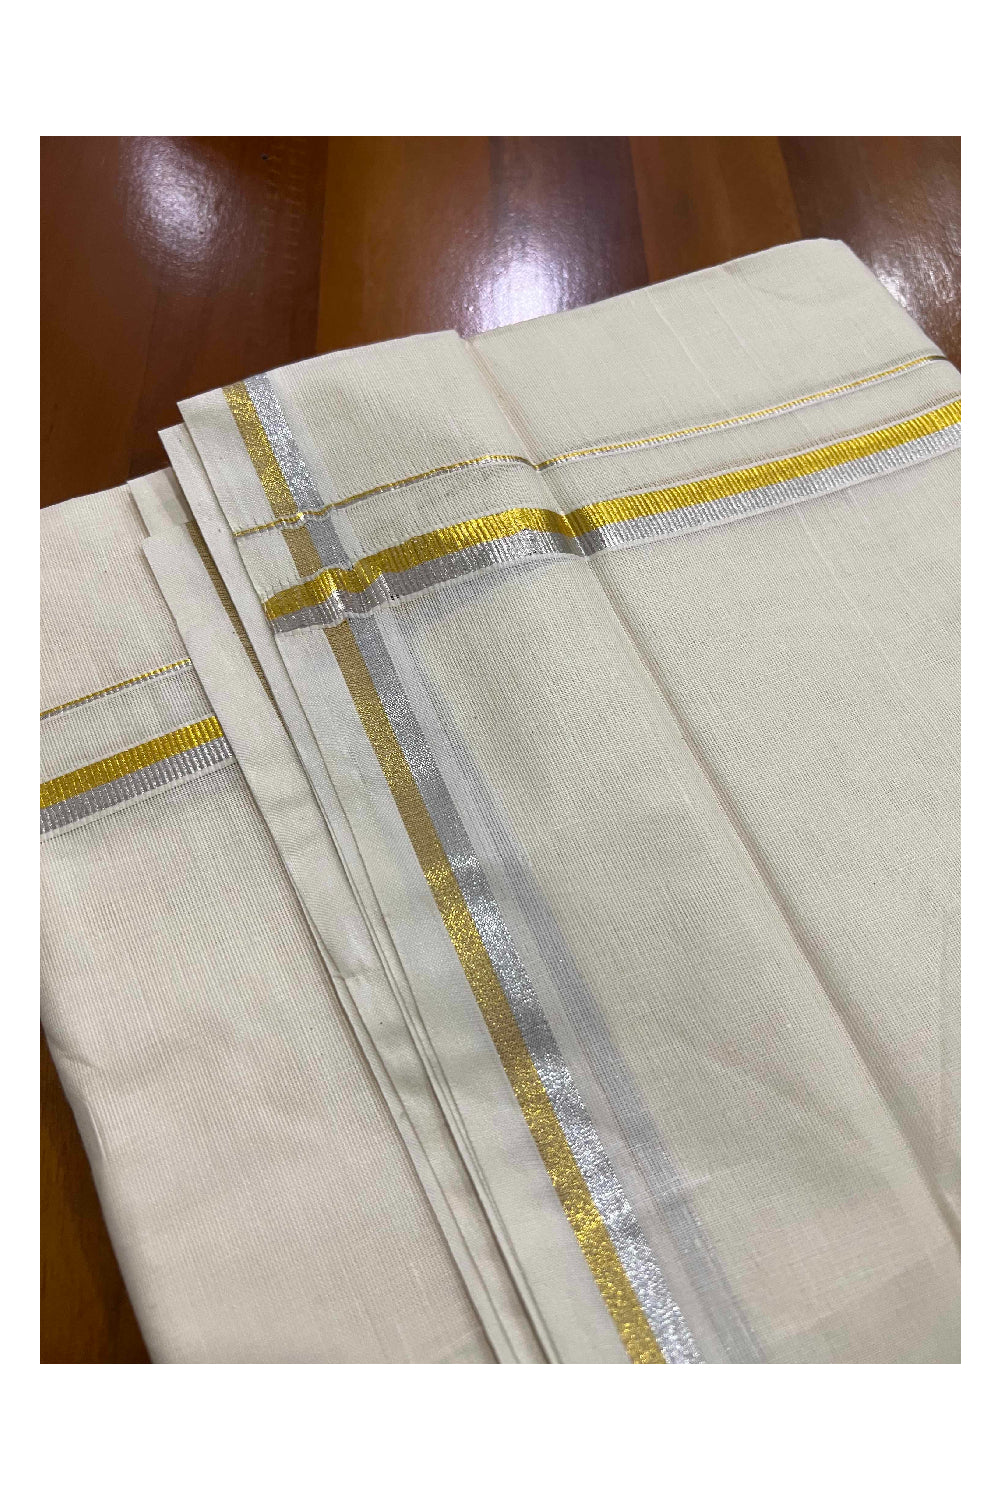 Off White Kerala Double Mundu with Silver and Golden Kasavu Border 0.5 inches (South Indian Dhoti)